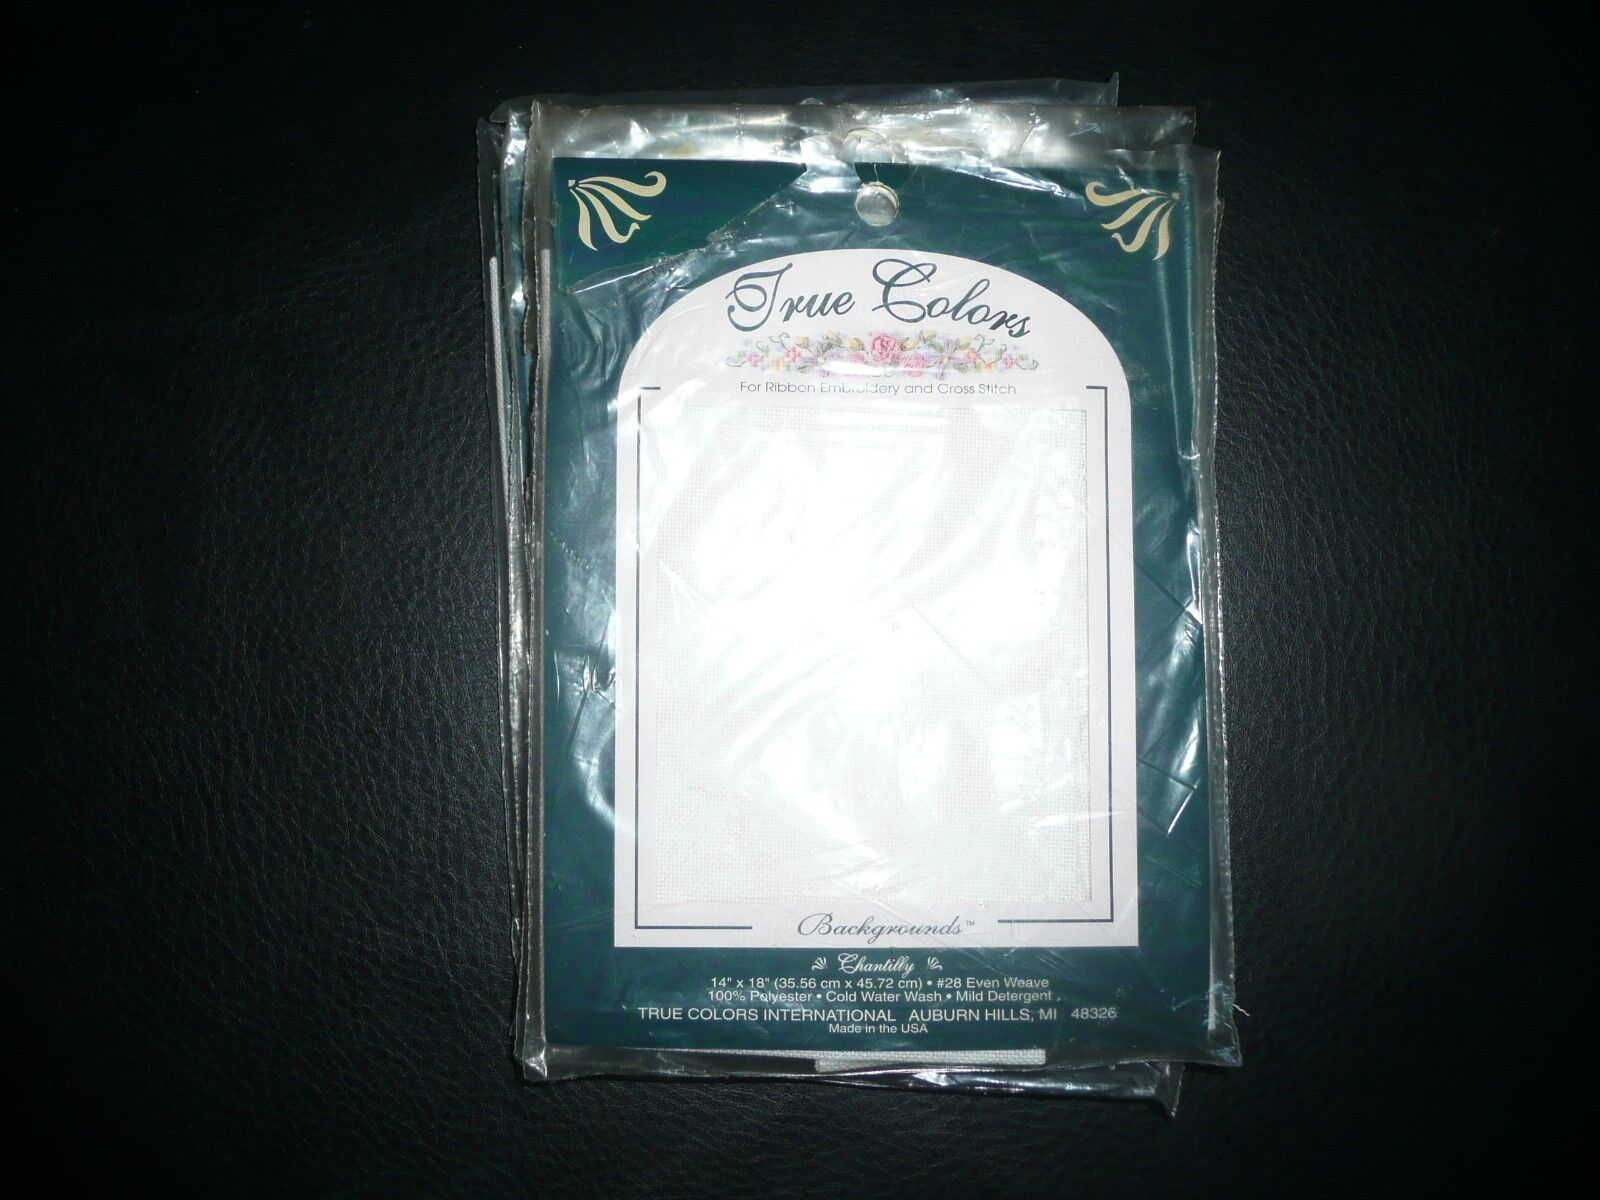 Unopened True Colors Backgrounds - Ribbon embroidery & Cross Stitch - 14"x18"  True Colors